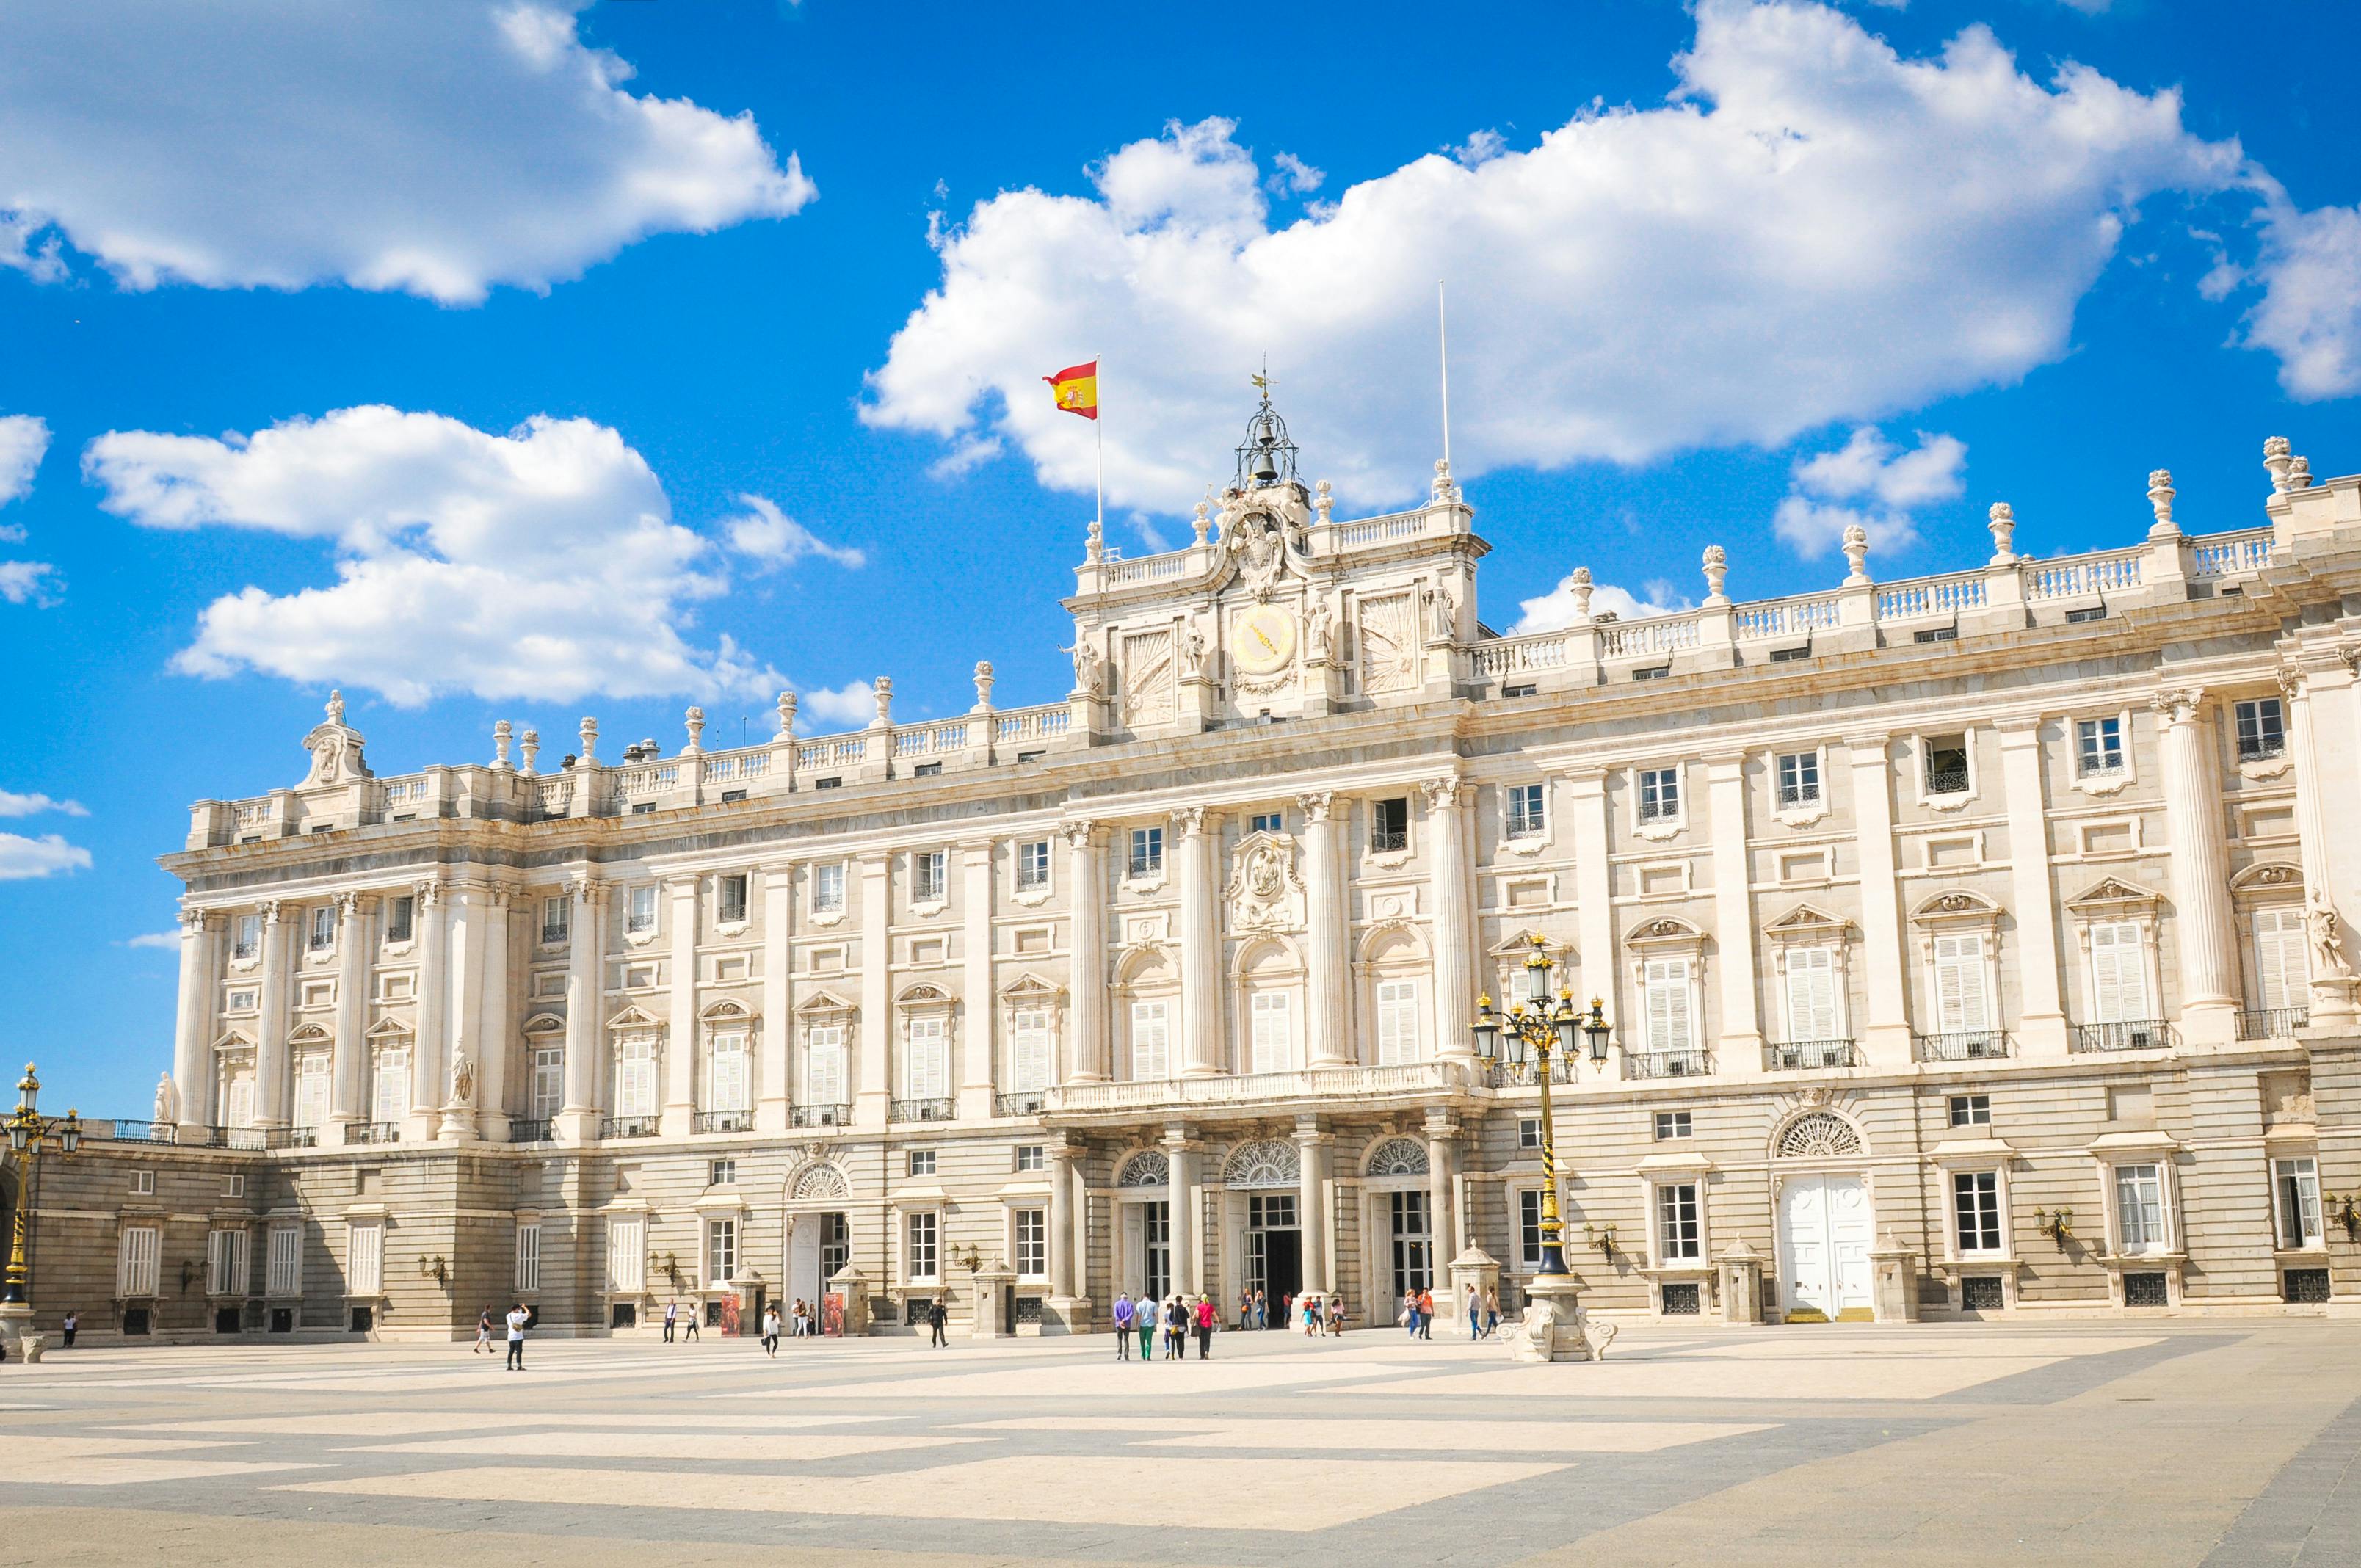 Royal Palace of Madrid guided tour with skip the line tickets Musement